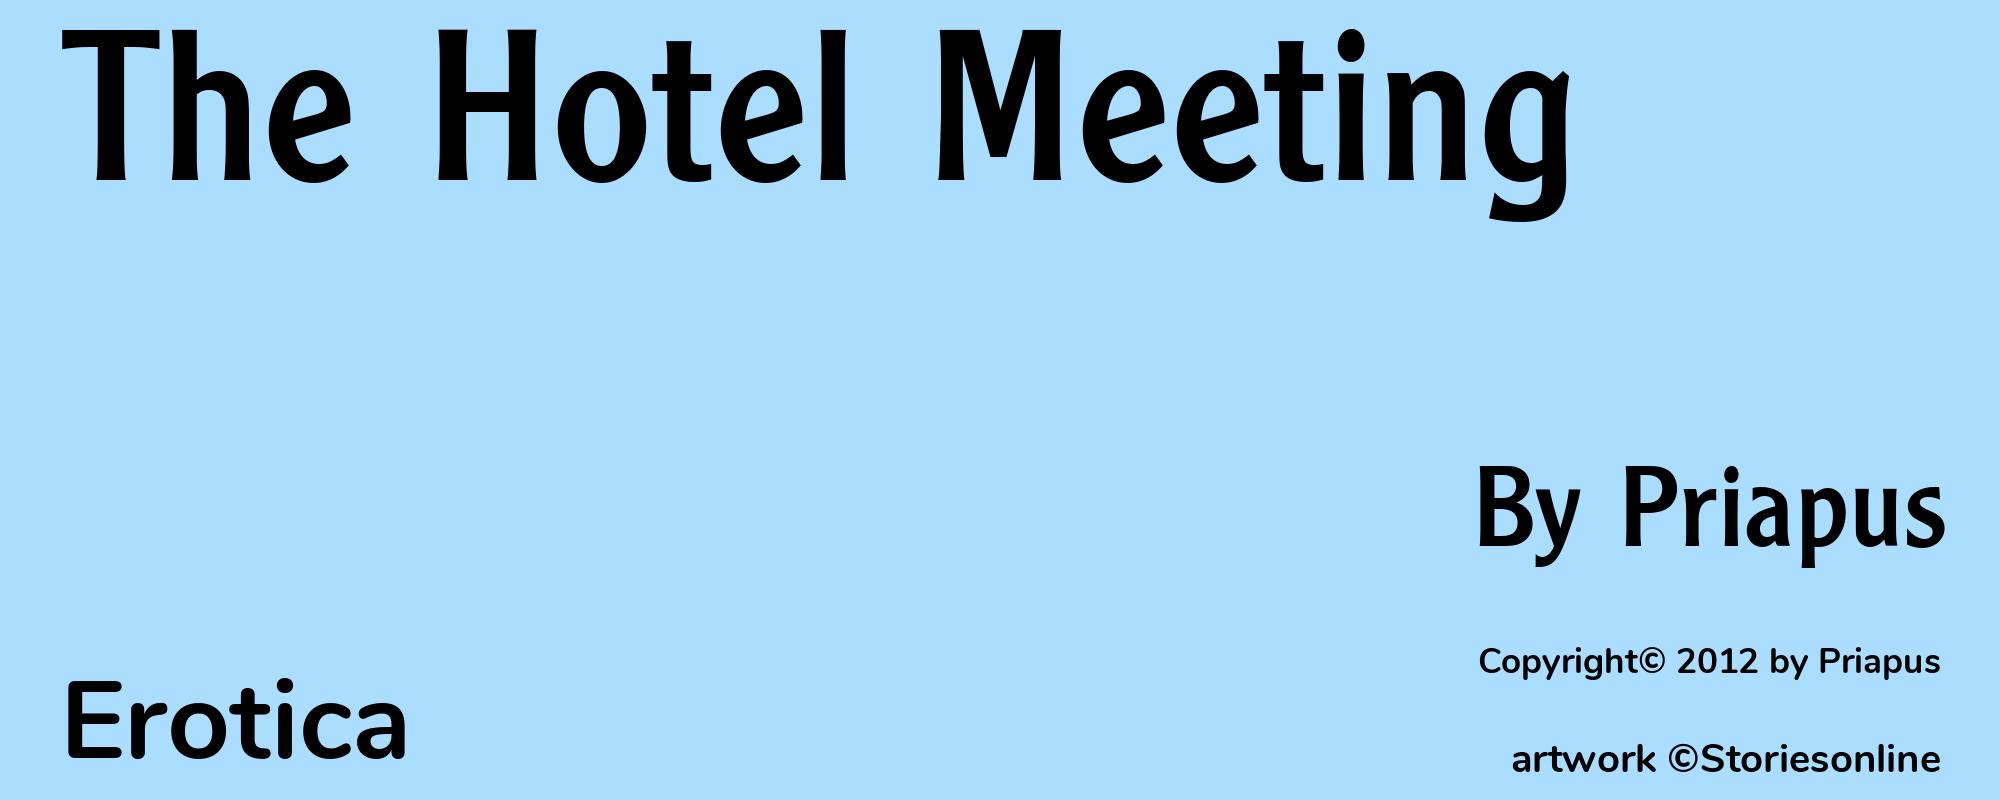 The Hotel Meeting - Cover